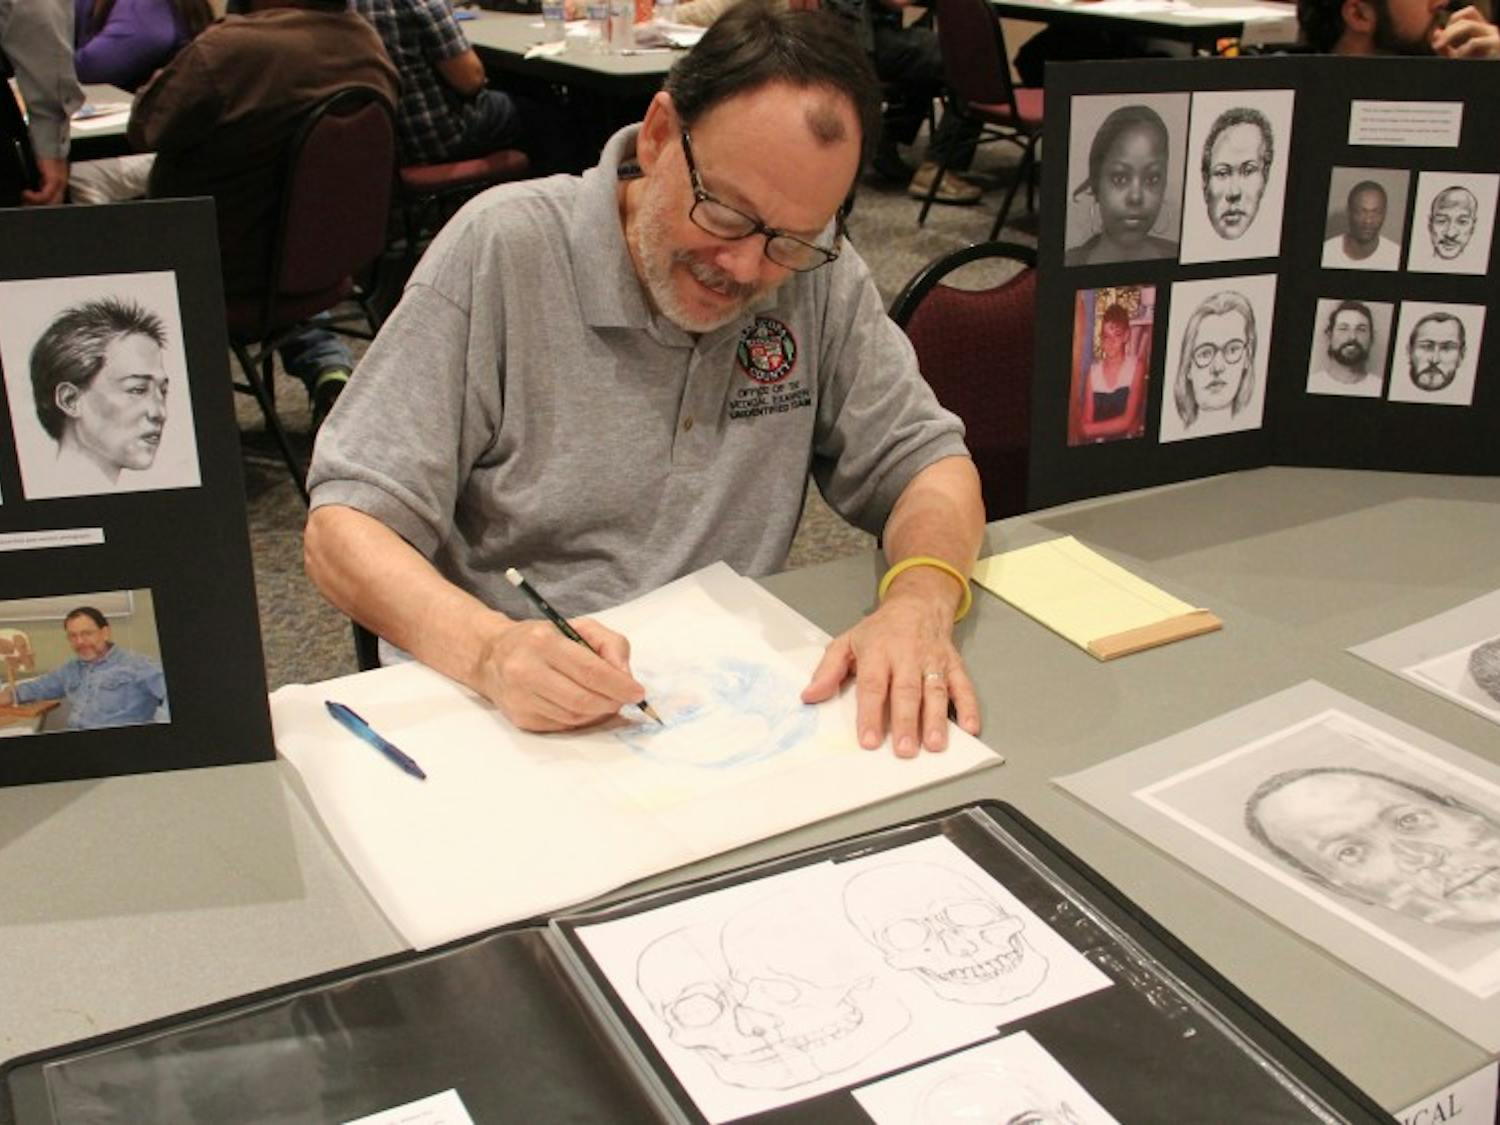 Forensic artist Stephen Missal draws sketches of missing persons to help the public visualize who they might be looking for at the inaugural Missing in Arizona day at ASU West campus on Oct. 24, 2015. 